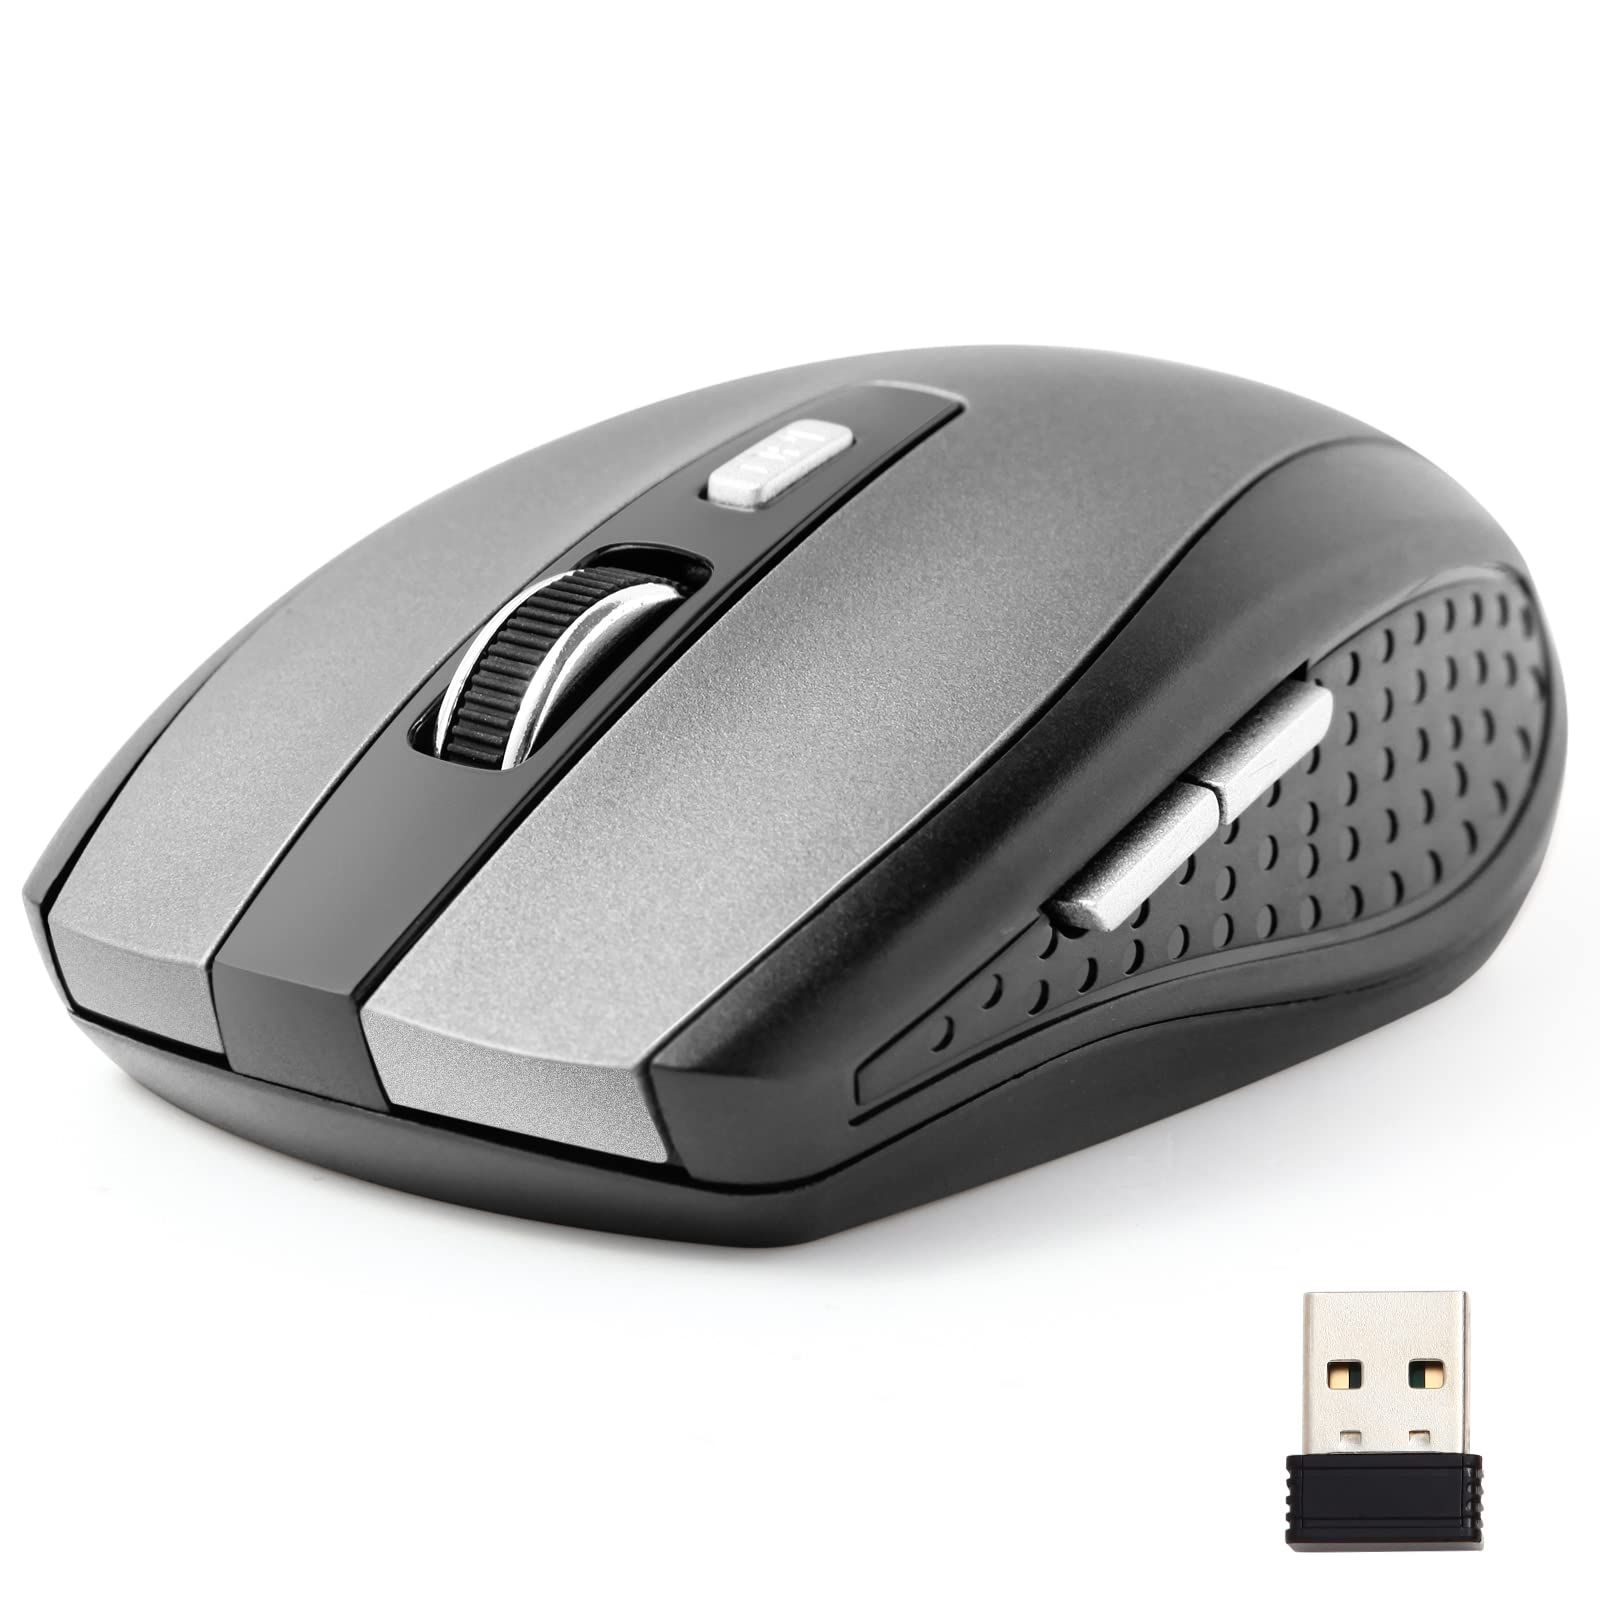 A picture of a wireless mouse and a computer/laptop.